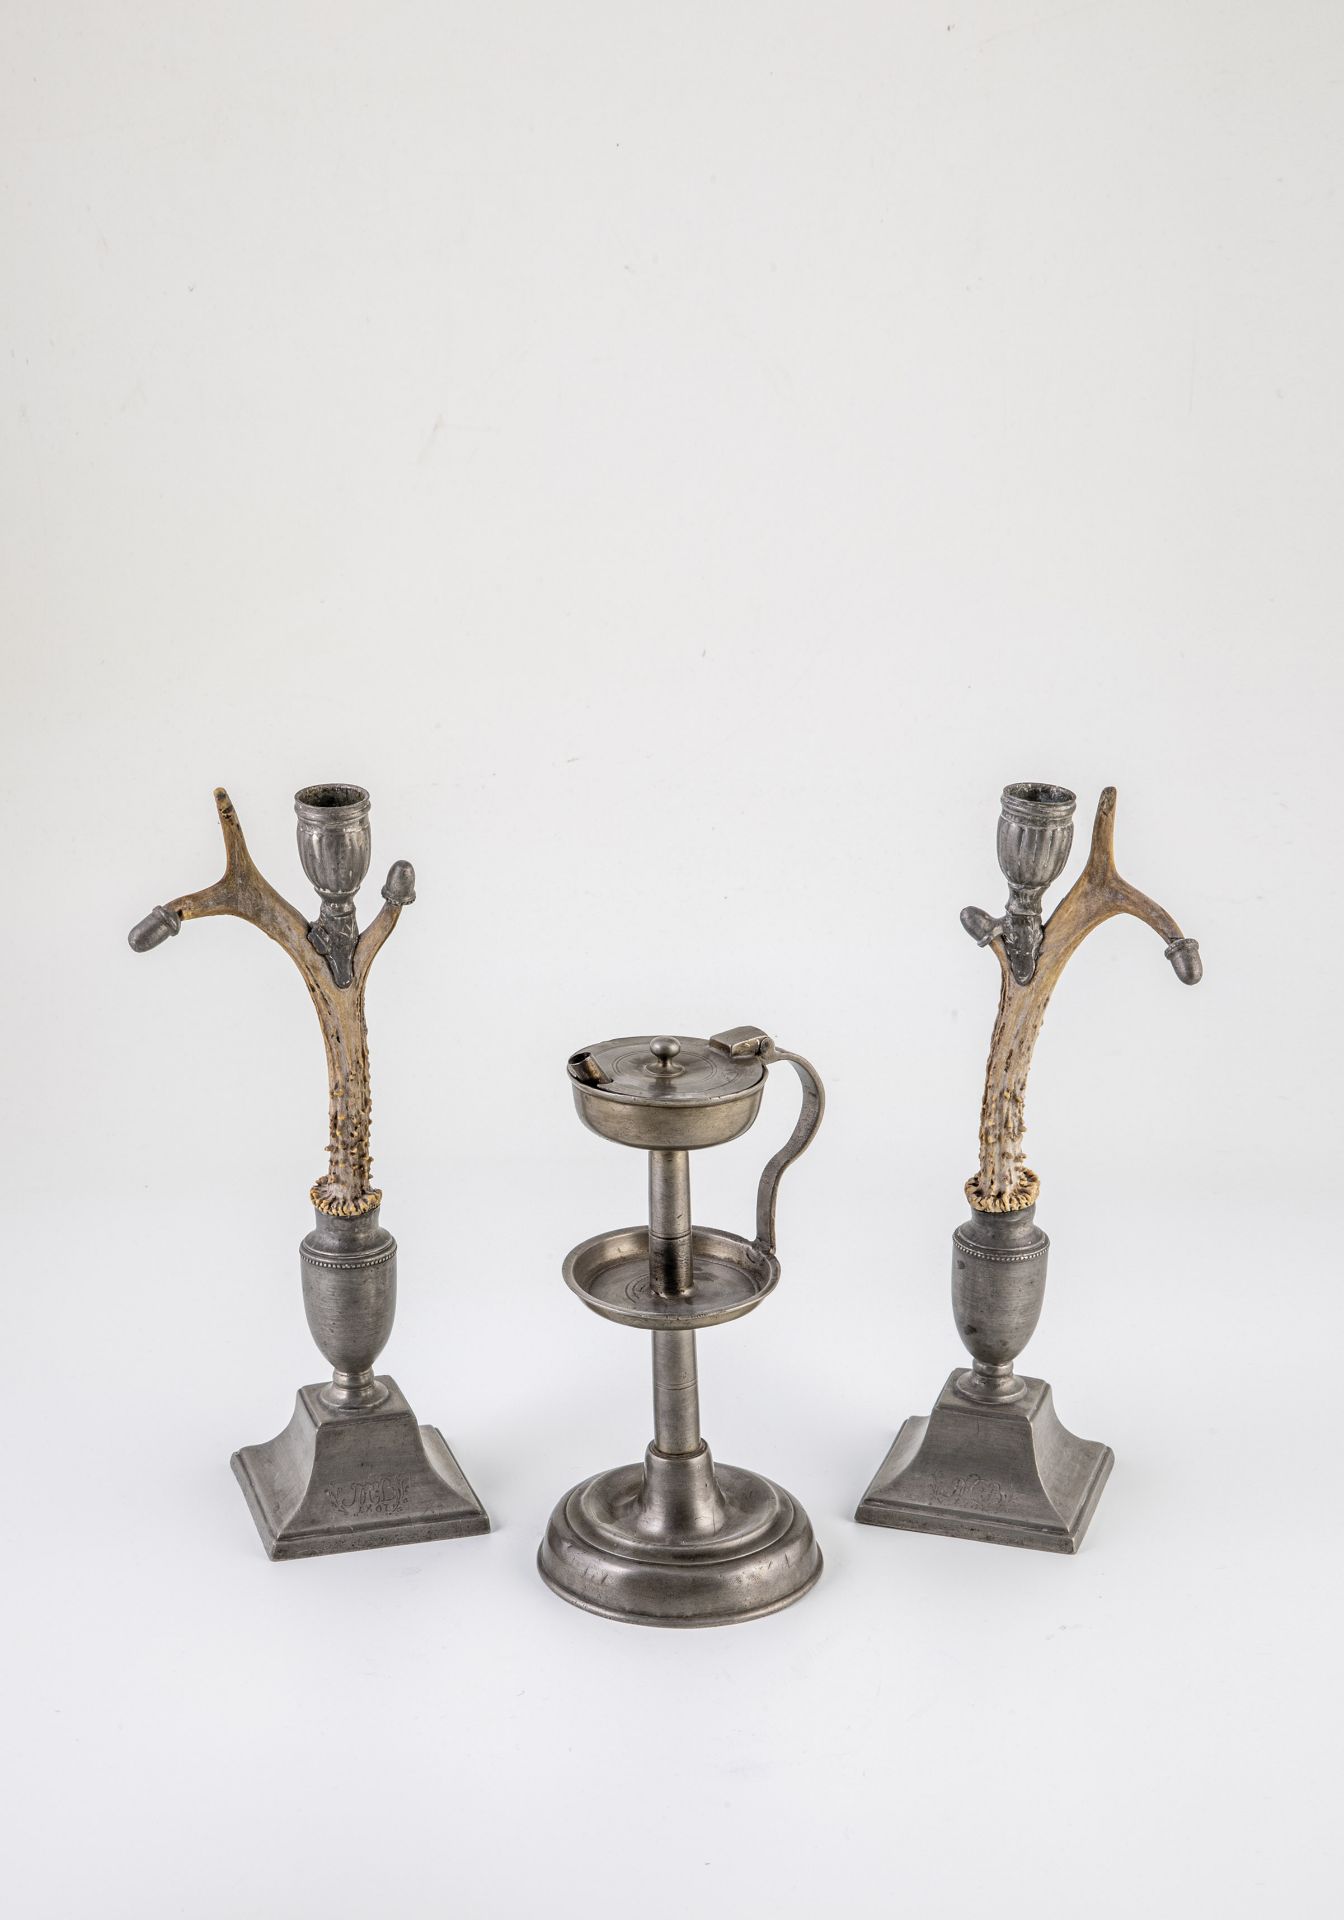 Pair of candlesticks and oil lamp